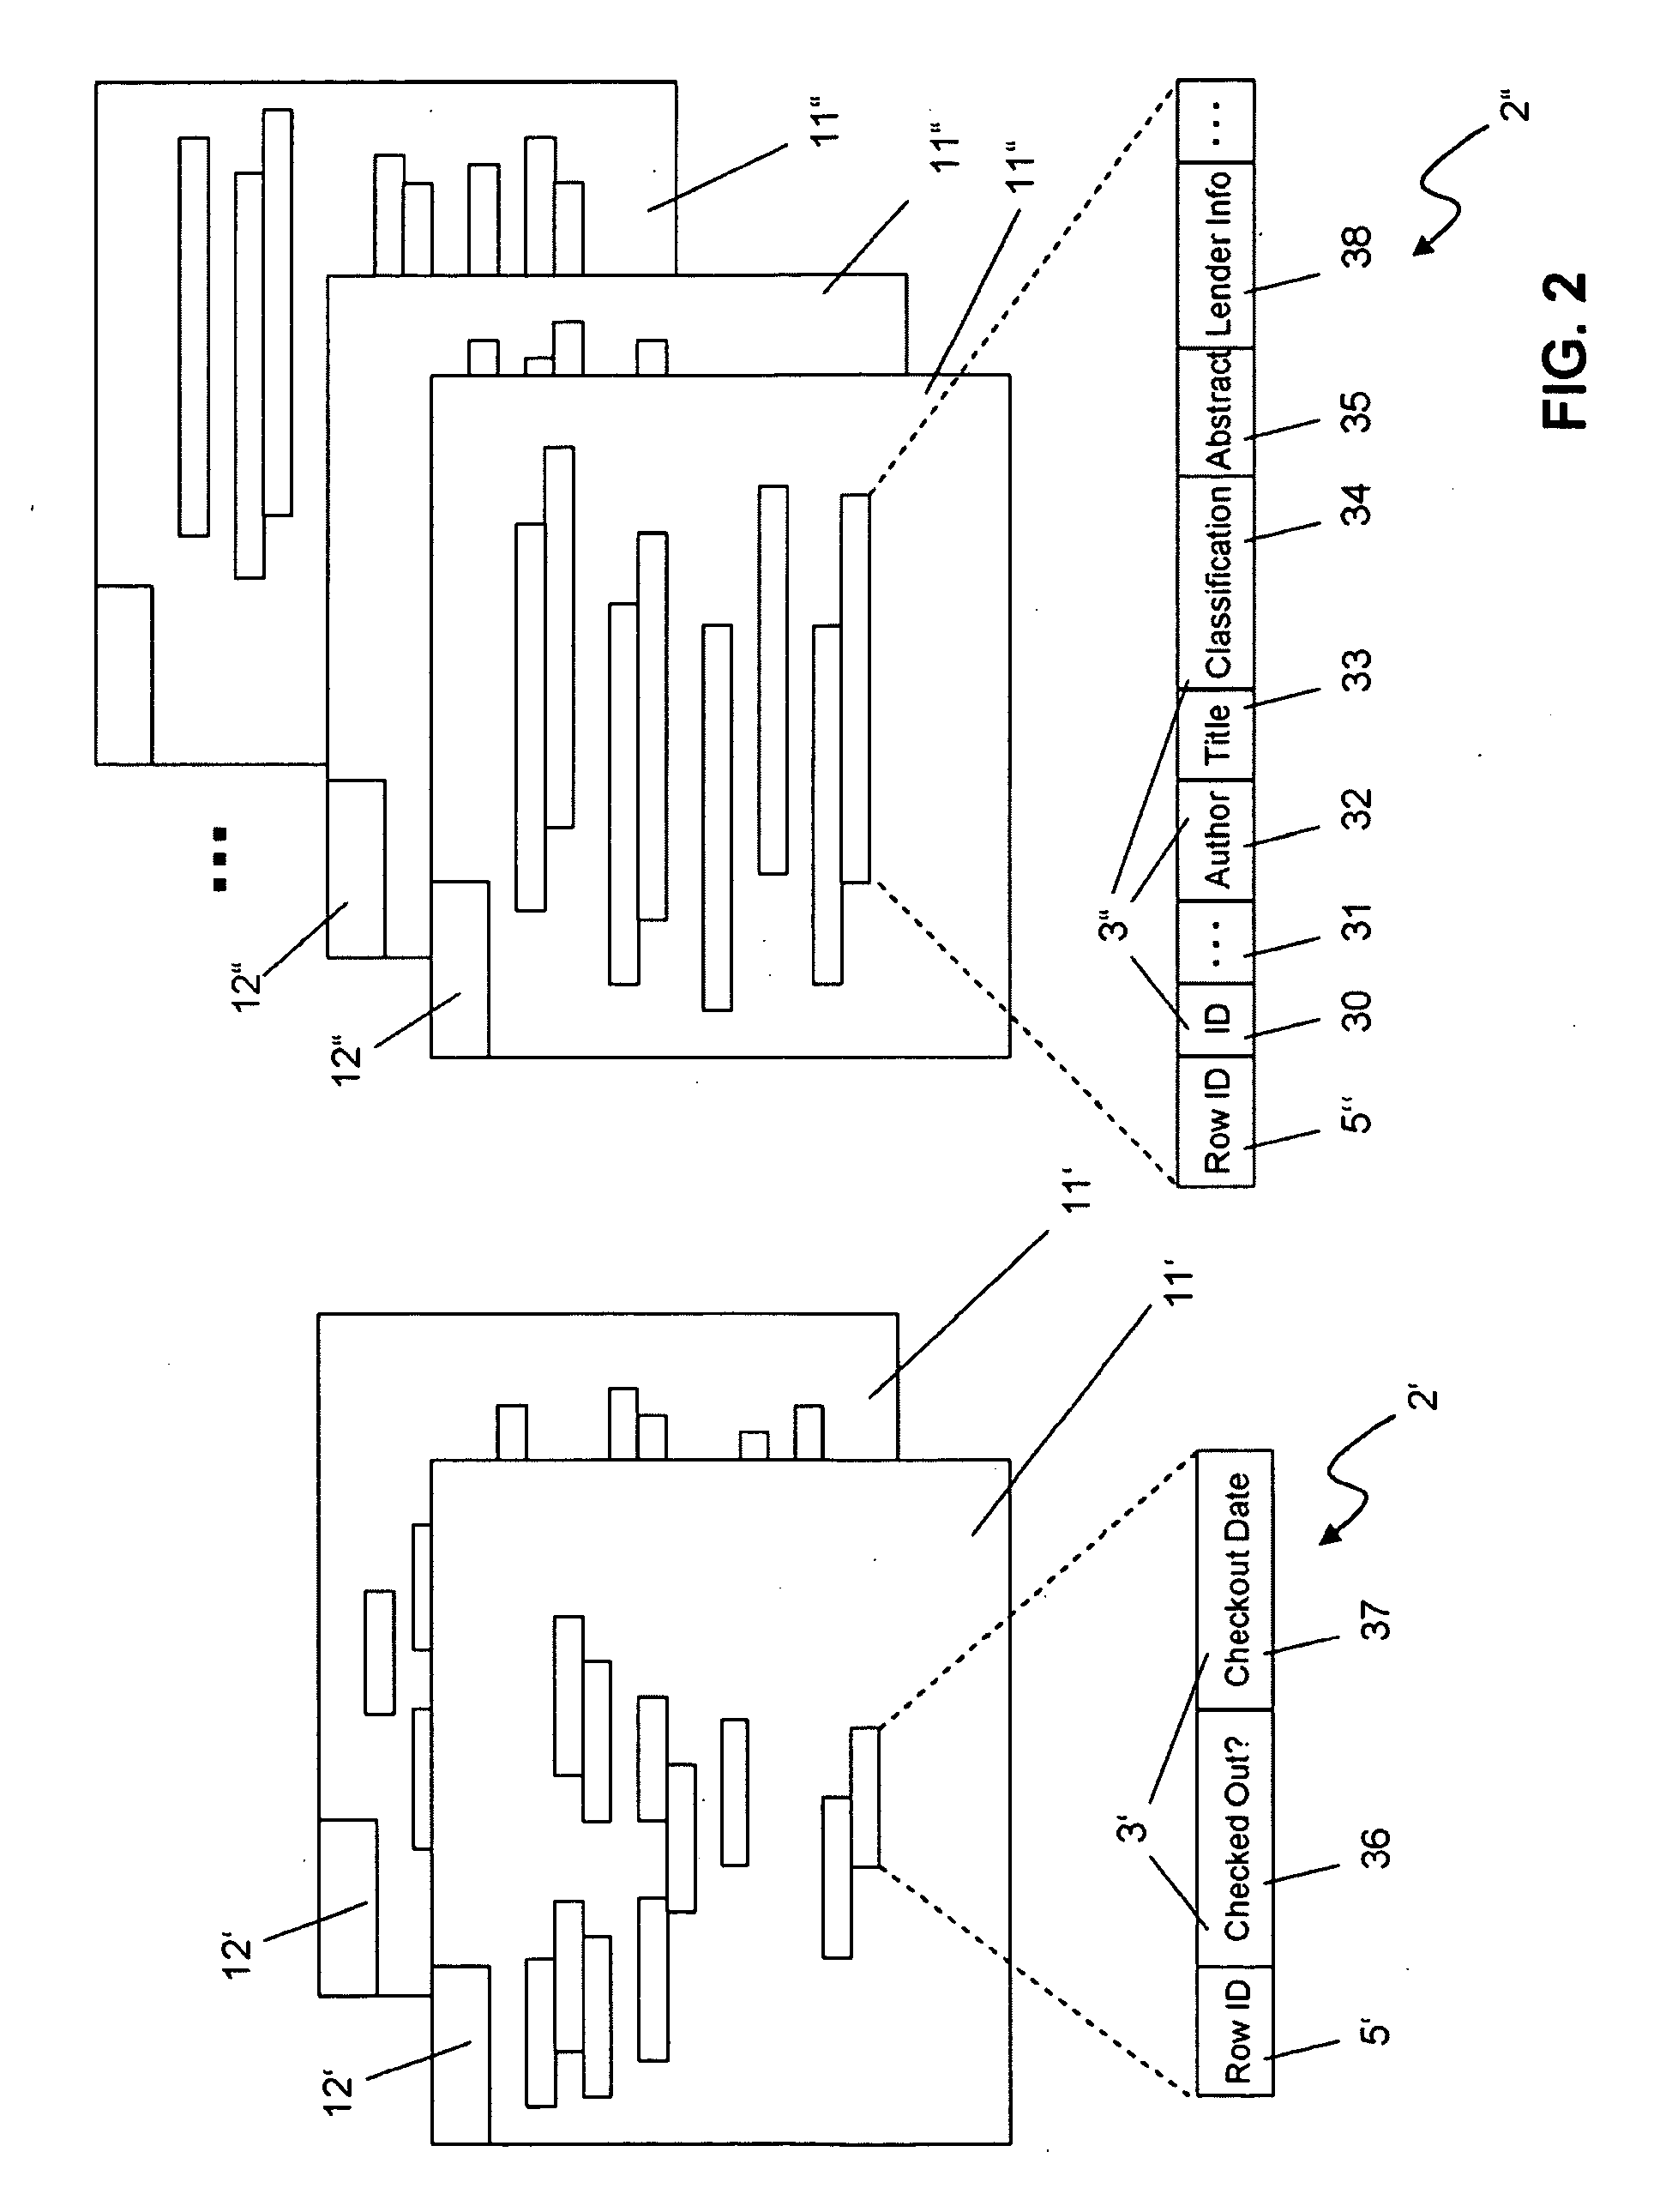 Method and system for optimizing data access in a database using multi-class objects